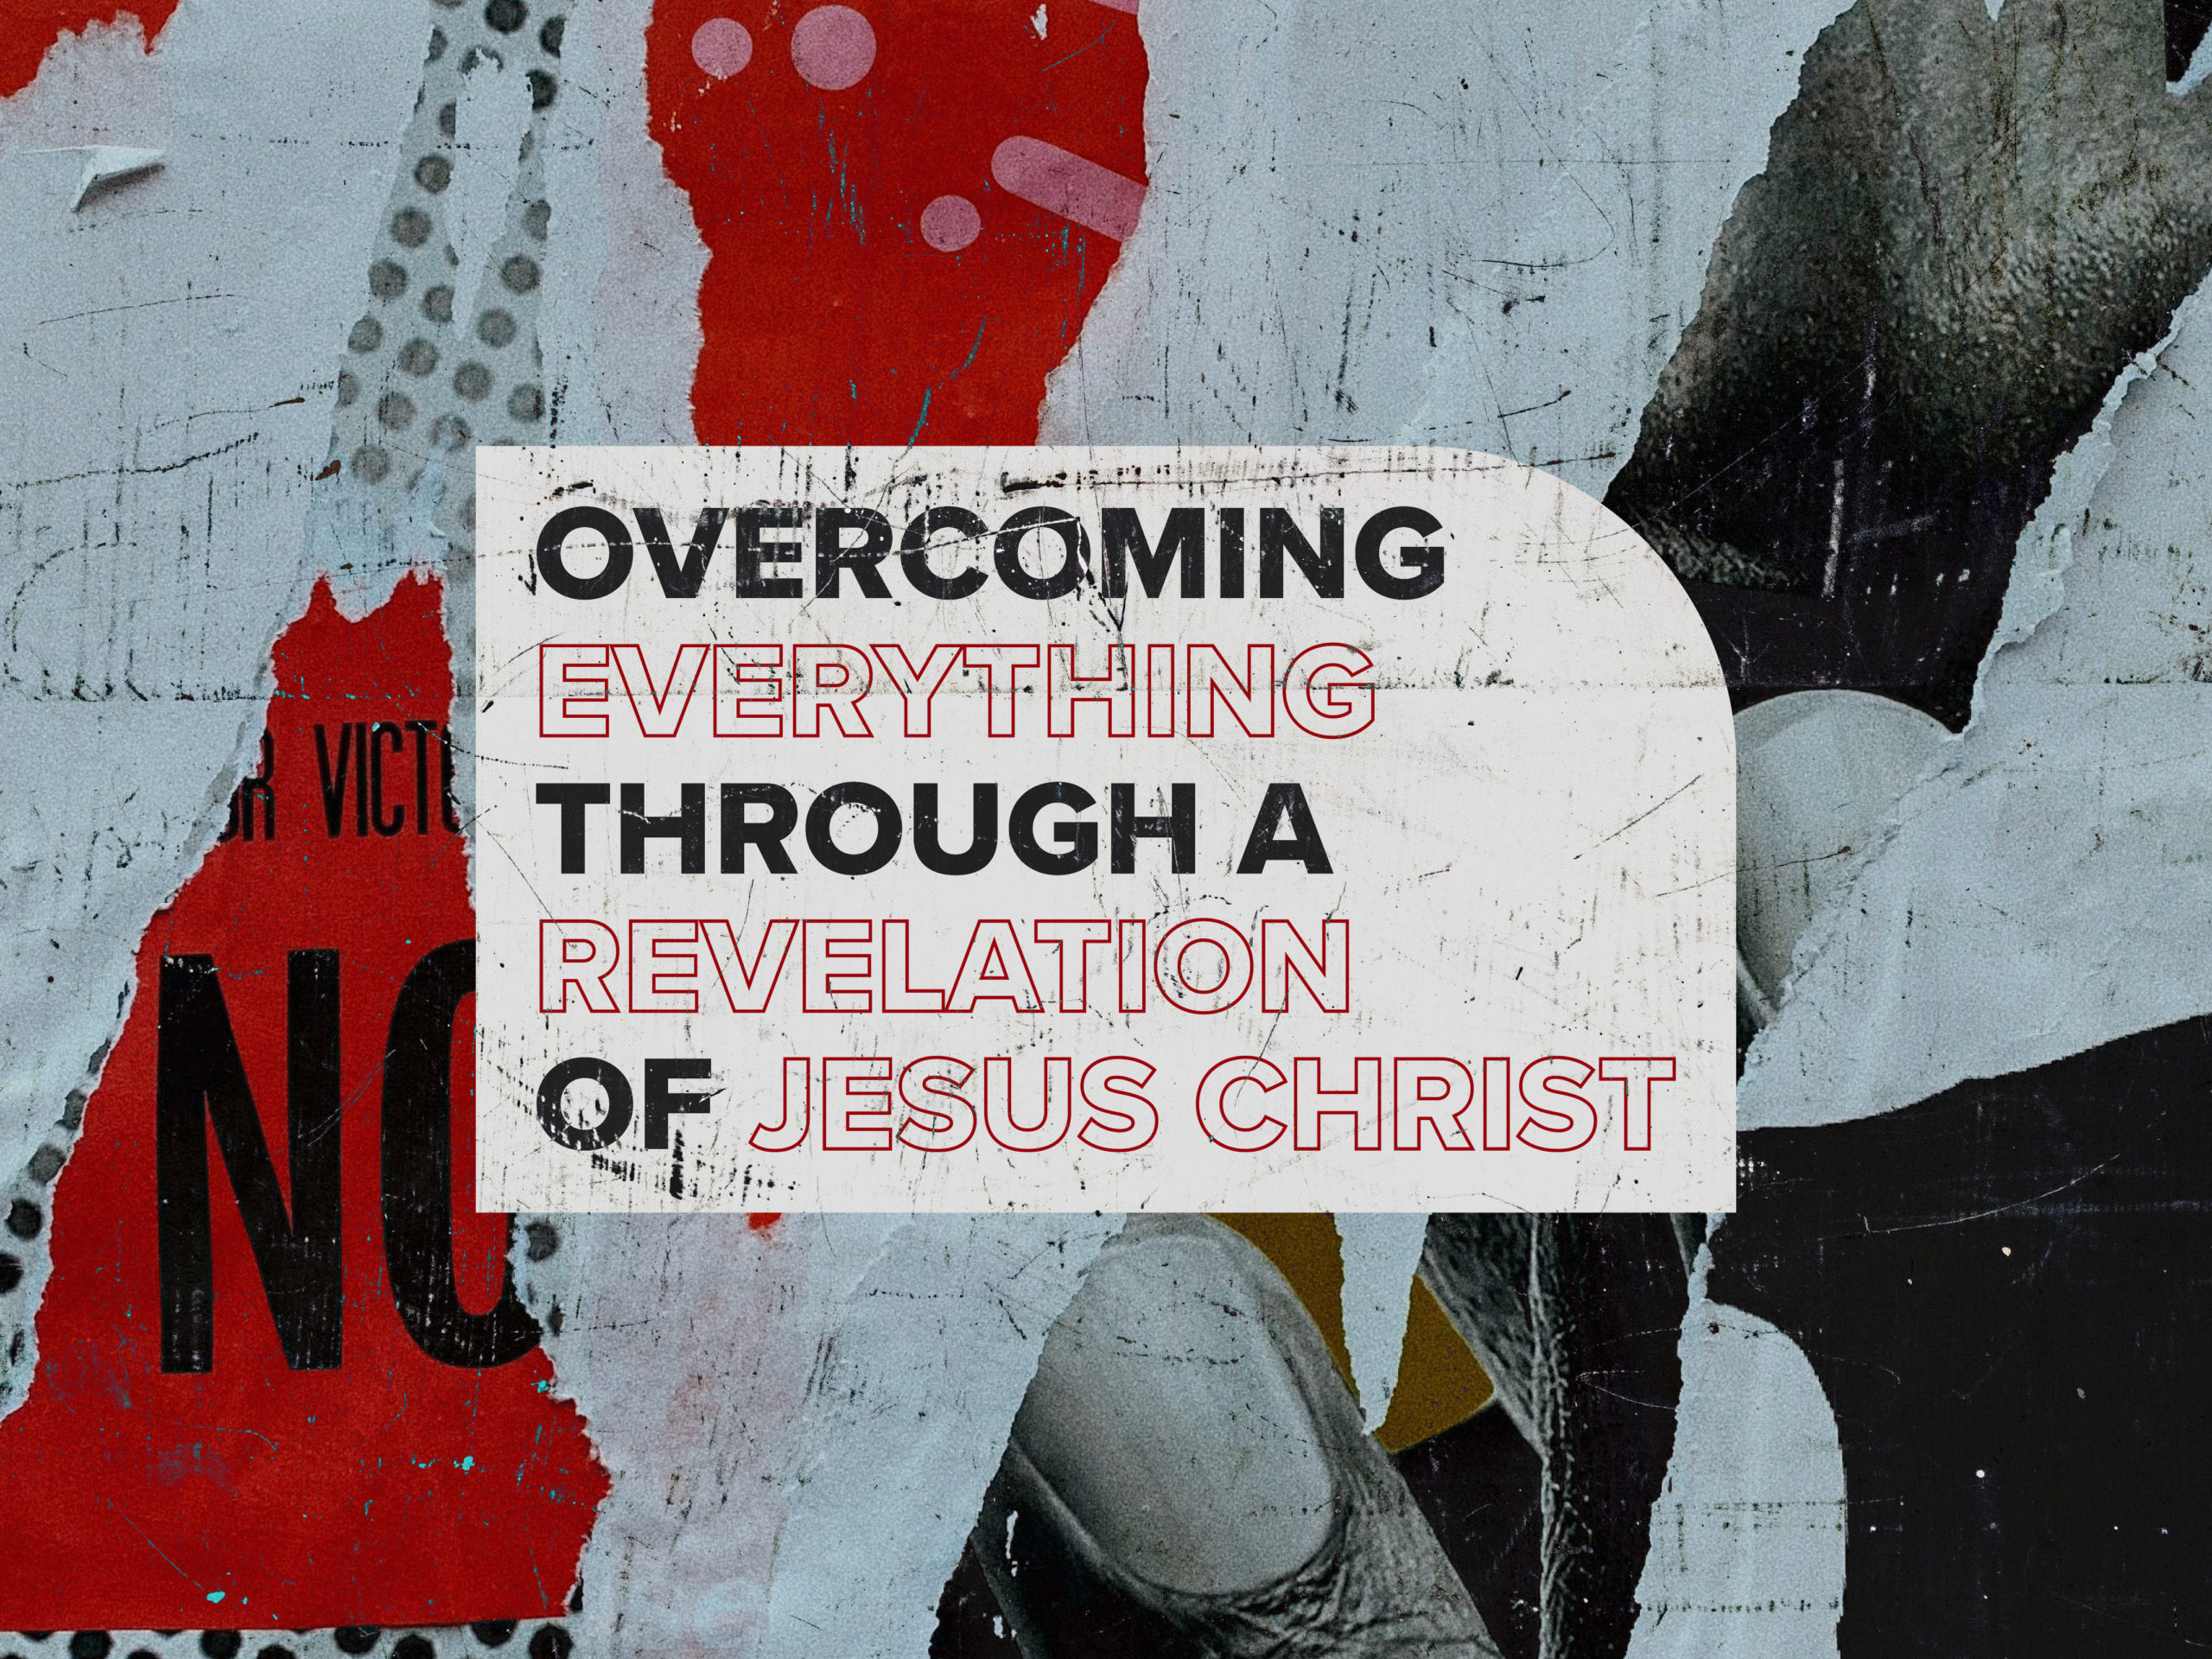 Lesson 1: The key to overcoming everything: A Revelation of Jesus Christ 